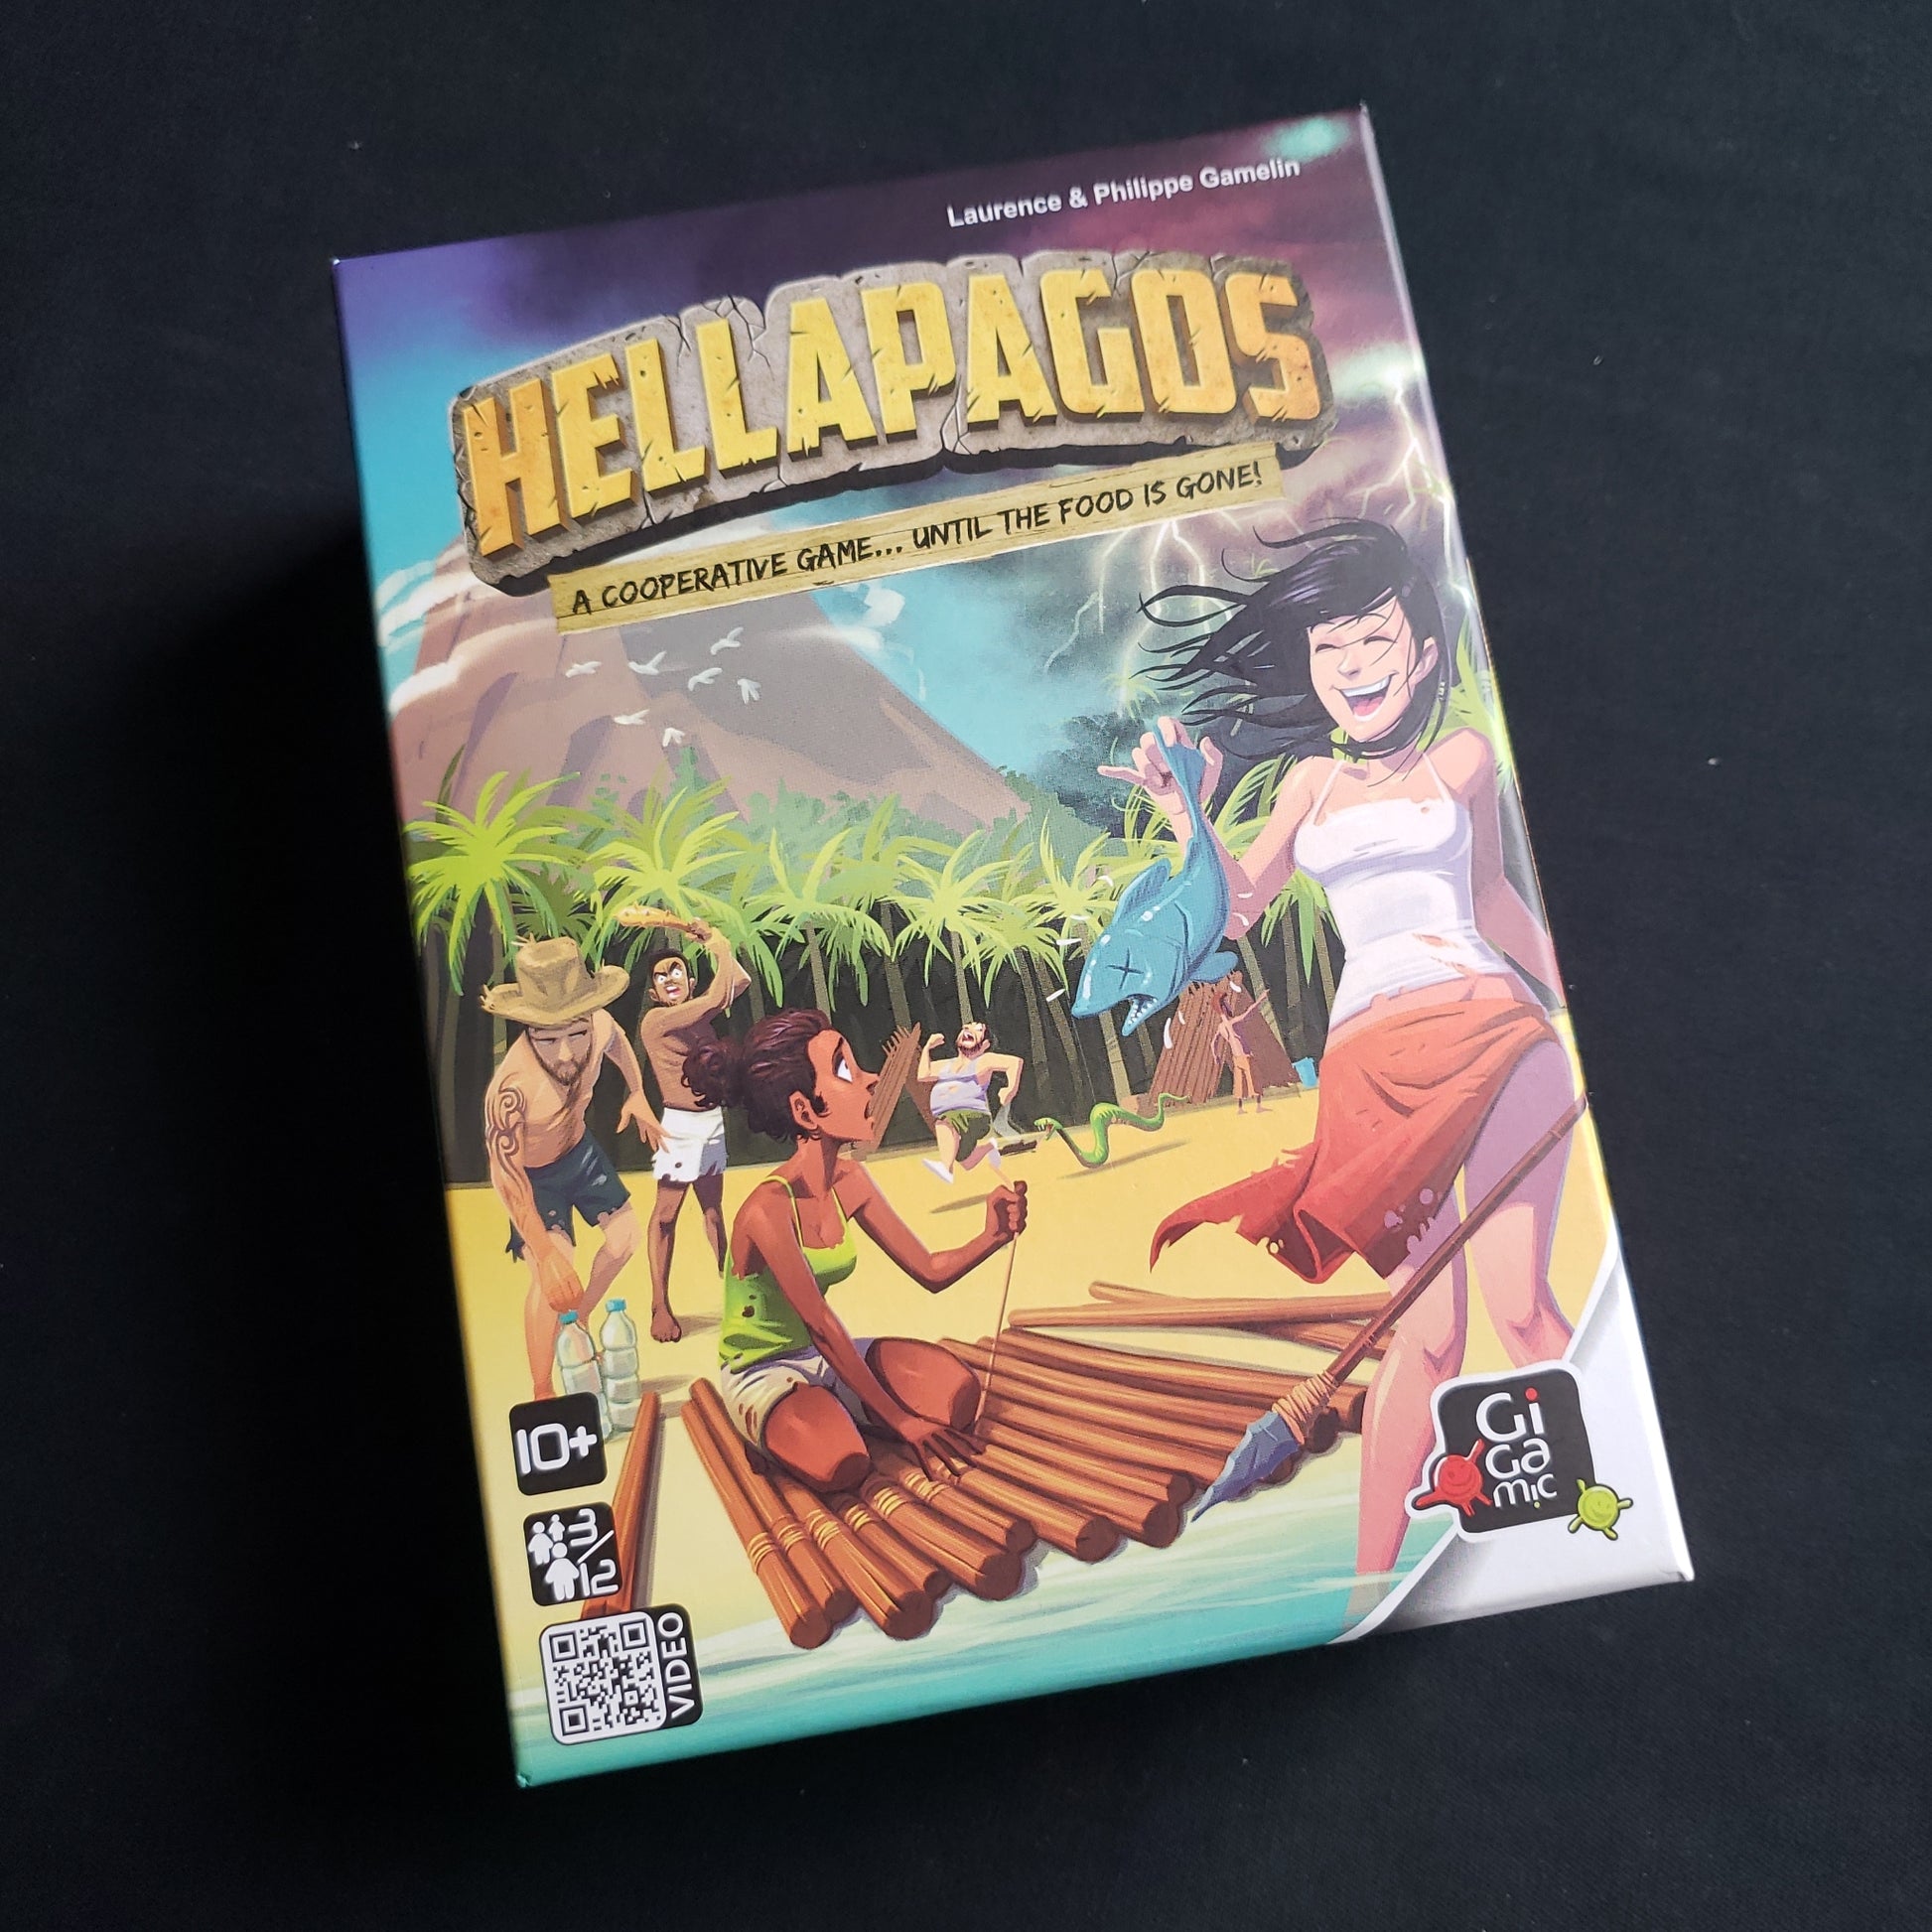 Image shows the front cover of the box of the Hellapagos board game